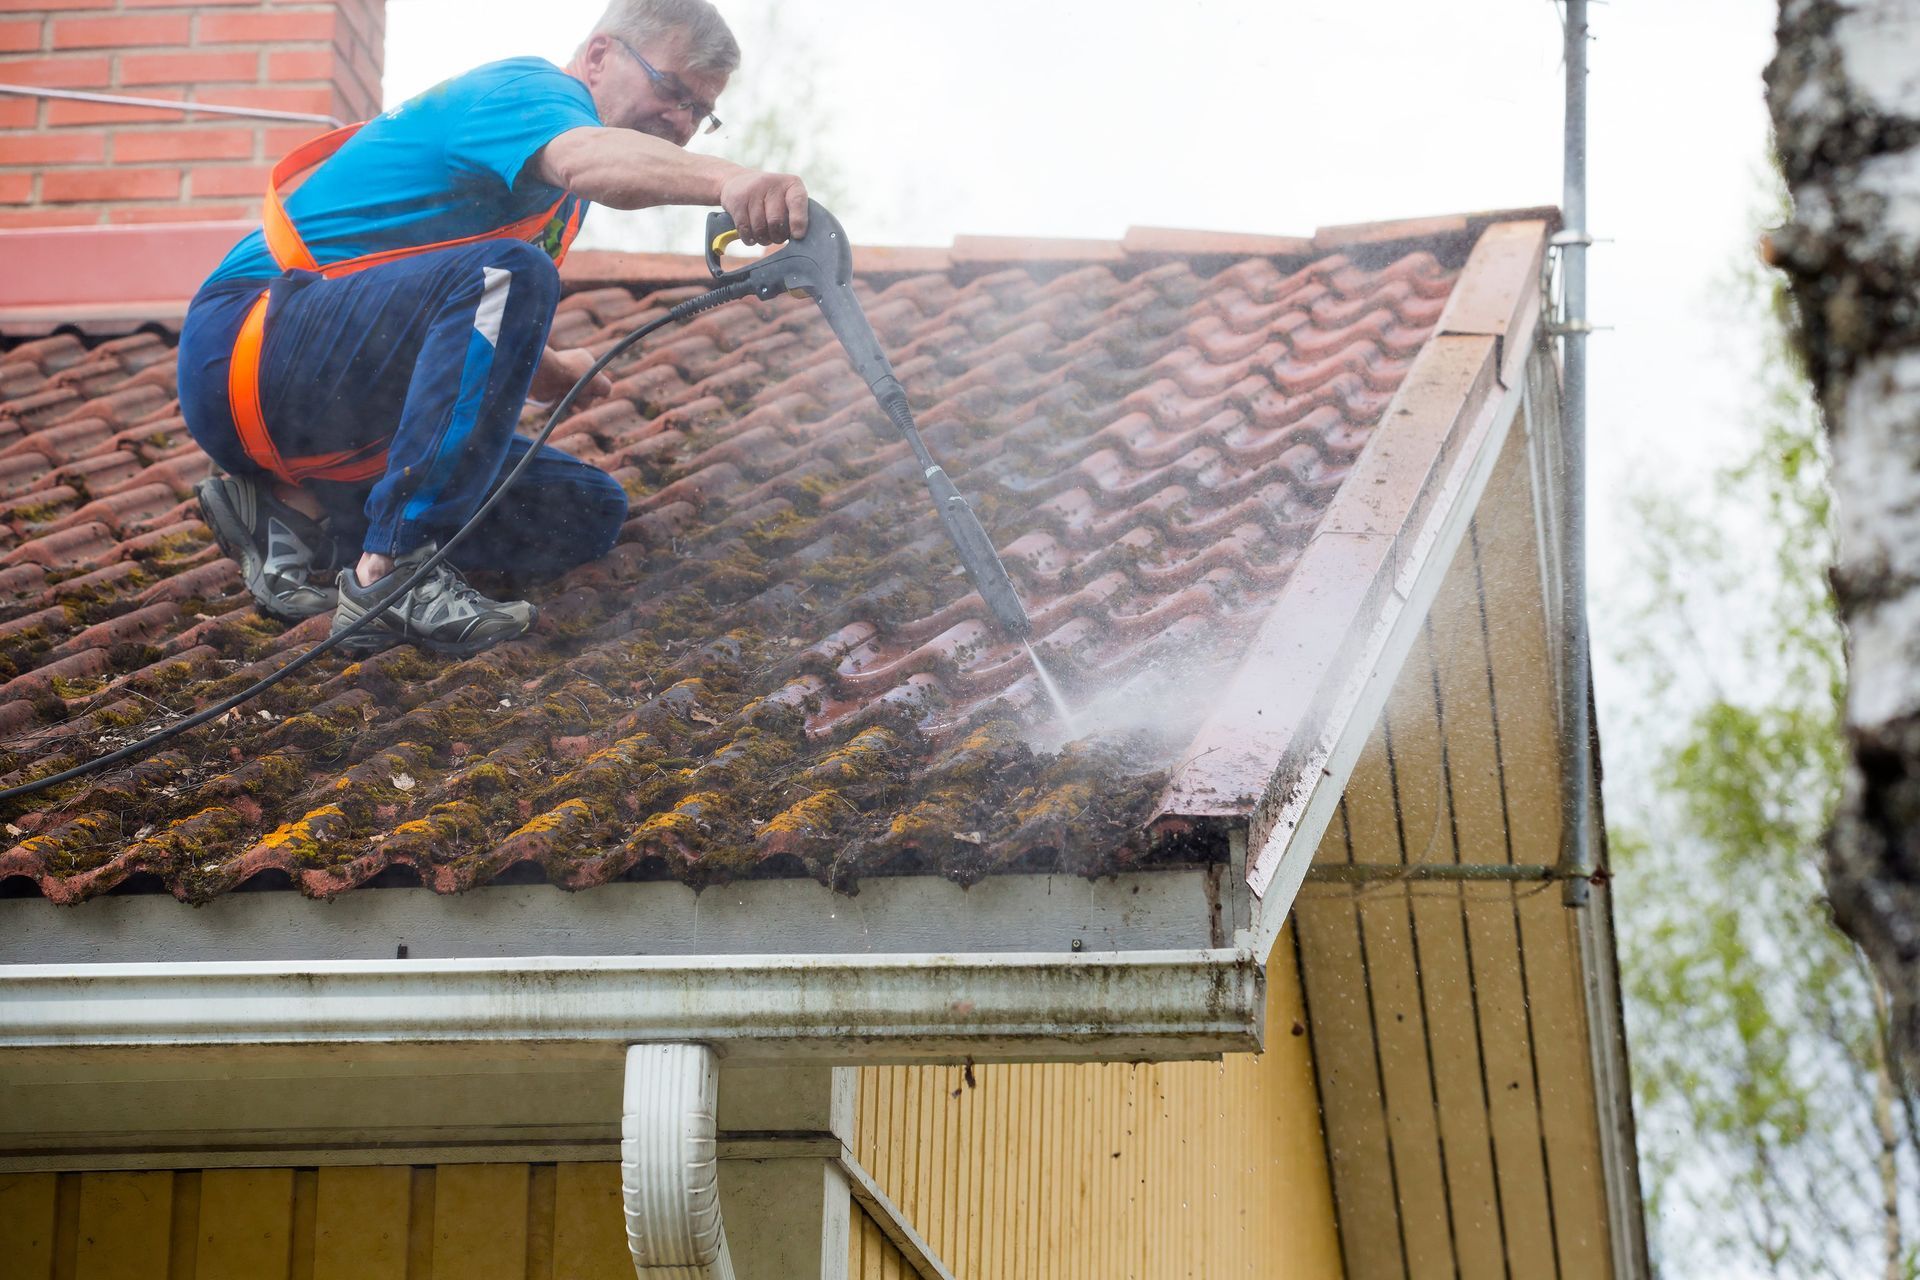 Man on roof power washing roof tiles